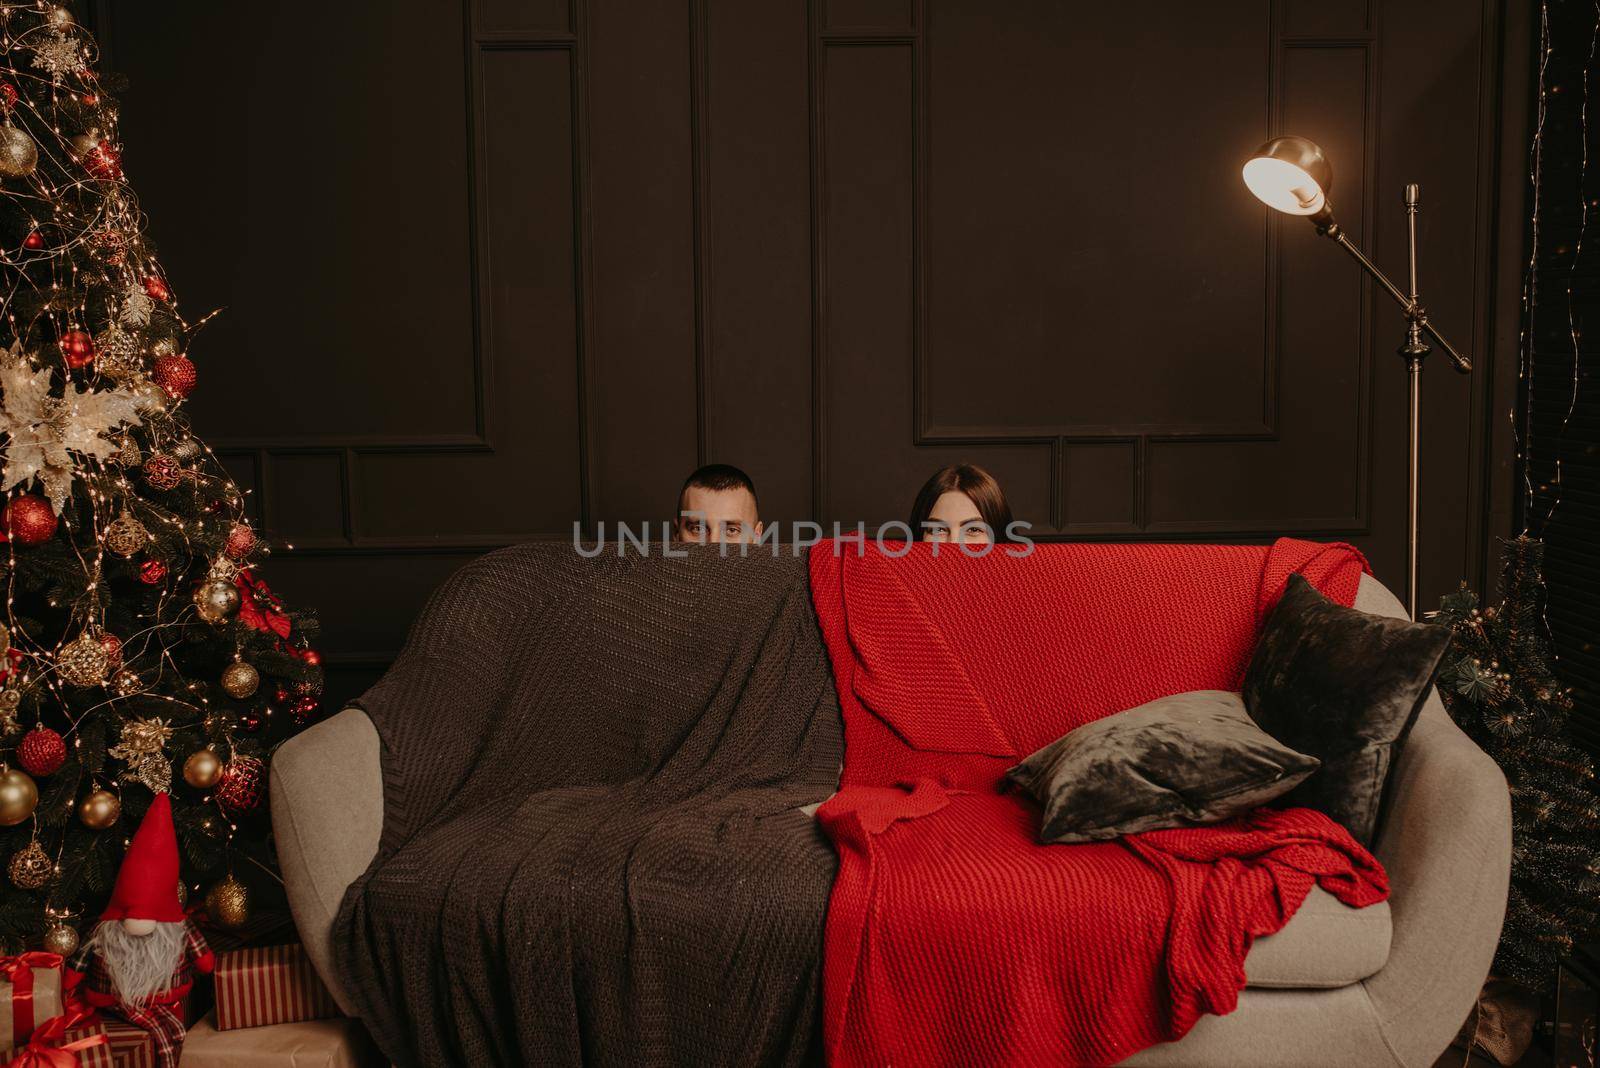 man and a woman hid behind couch. heads of a man and a woman stick out from behind sofa. decorated house for New Year. Christmas morning. apartment interior. Valentine's Day celebration